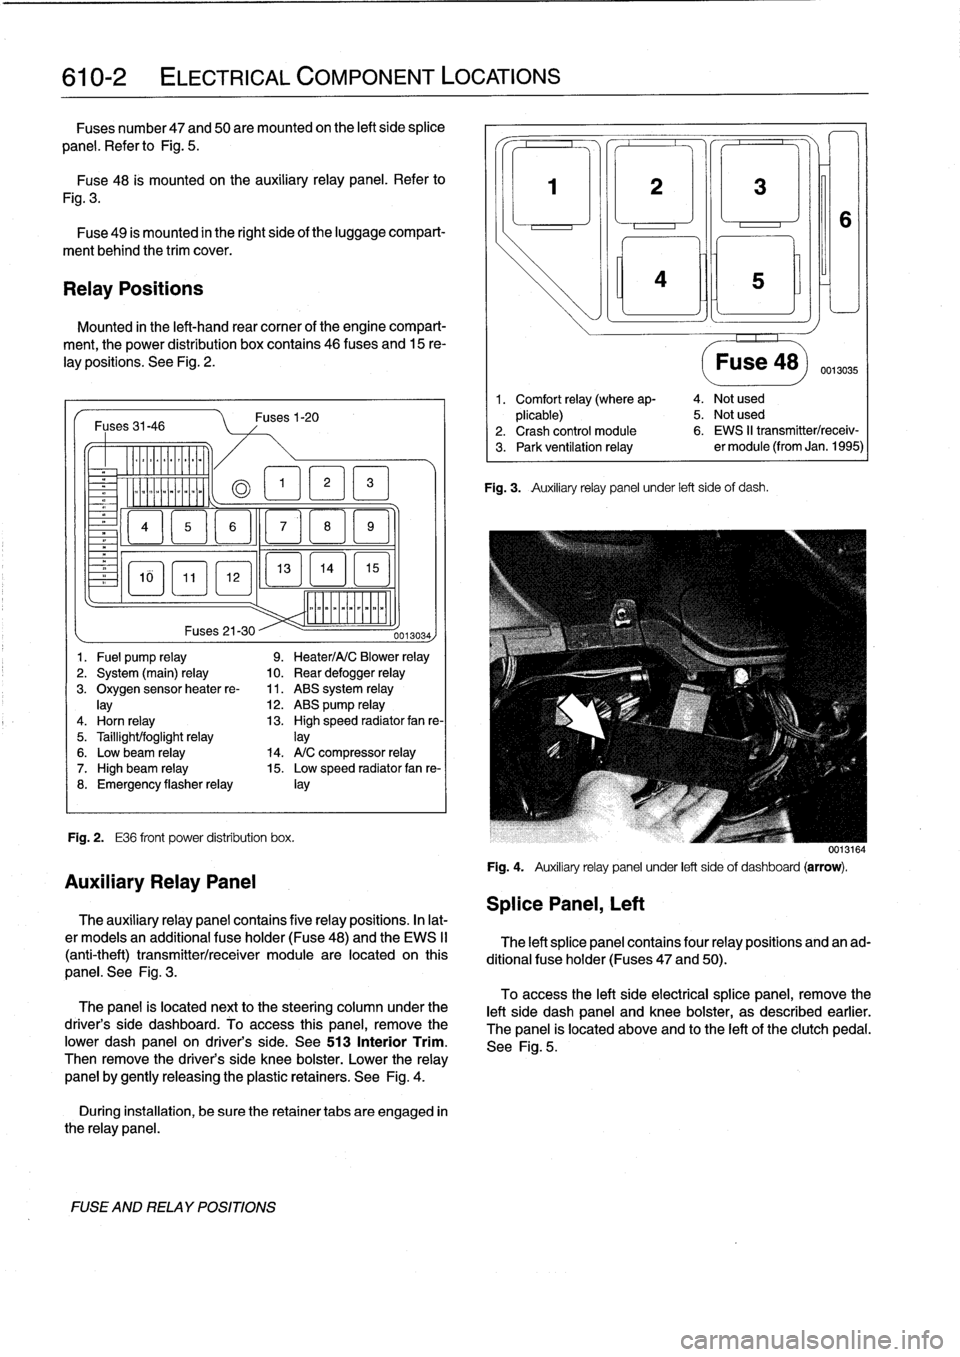 BMW 328i 1997 E36 Workshop Manual 
610-2

	

ELECTRICAL
COMPONENT
LOCATIONS

Fuses
number47
and
50are
mounted
on
the
left
side
splice

panel
.
Refer
lo
Fig
.
5
.

Fuse48
is
mounted
on
the
auxiliary
relay
panel
.
Refer
to

Fig
.
3
.

F